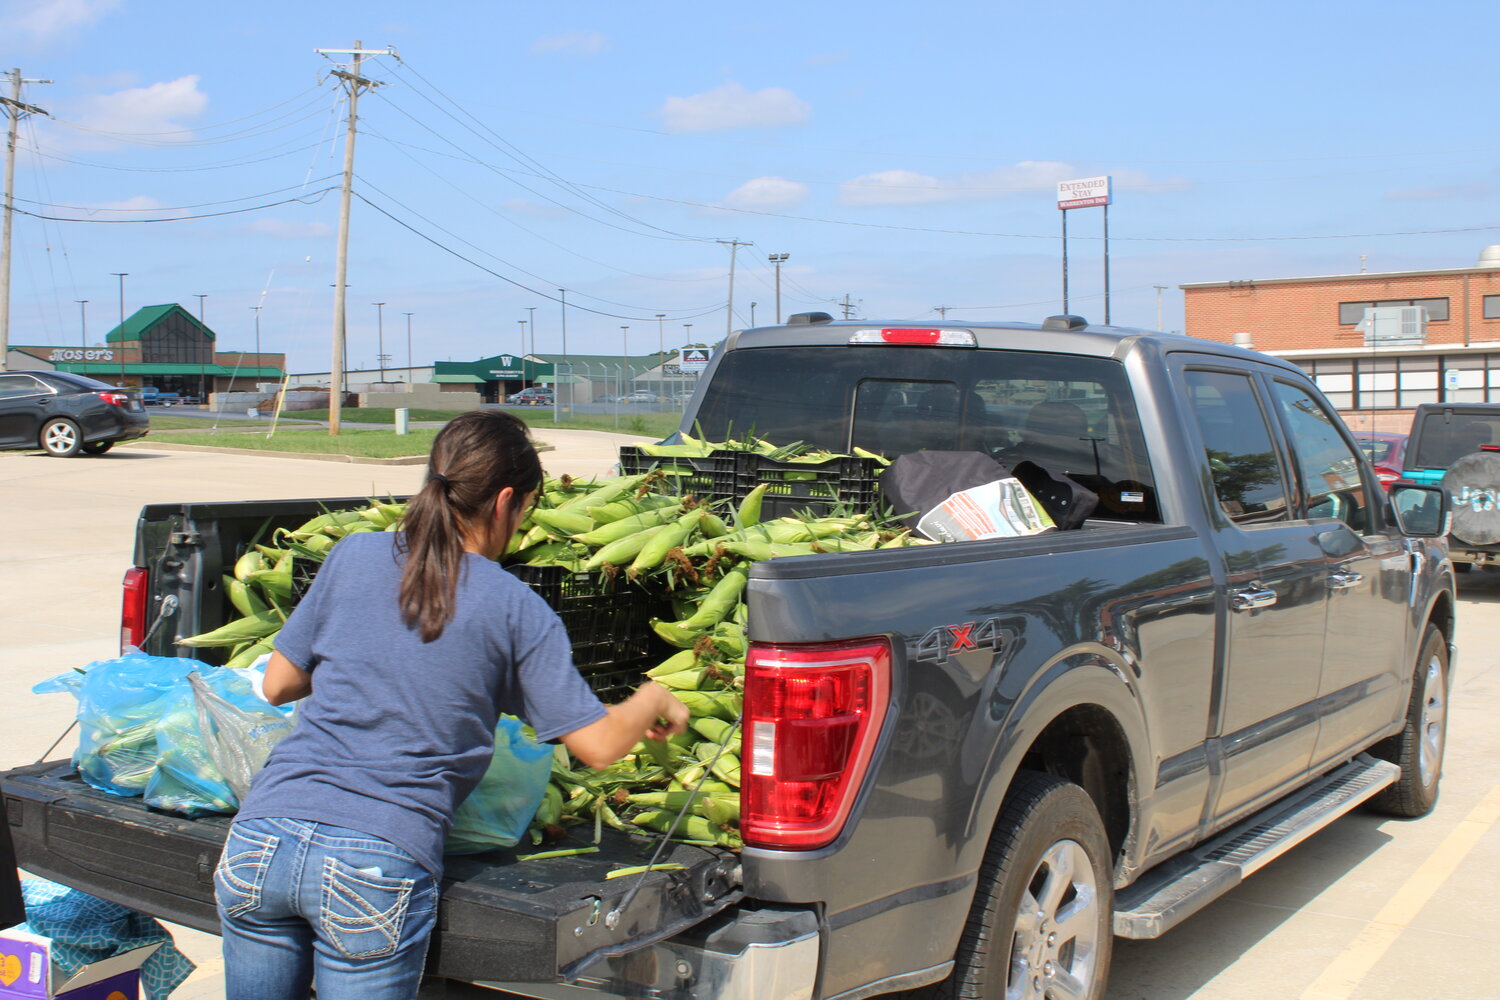 A vendor unloads corn from a truck before the start of the Aug. 1 market in Warrenton.